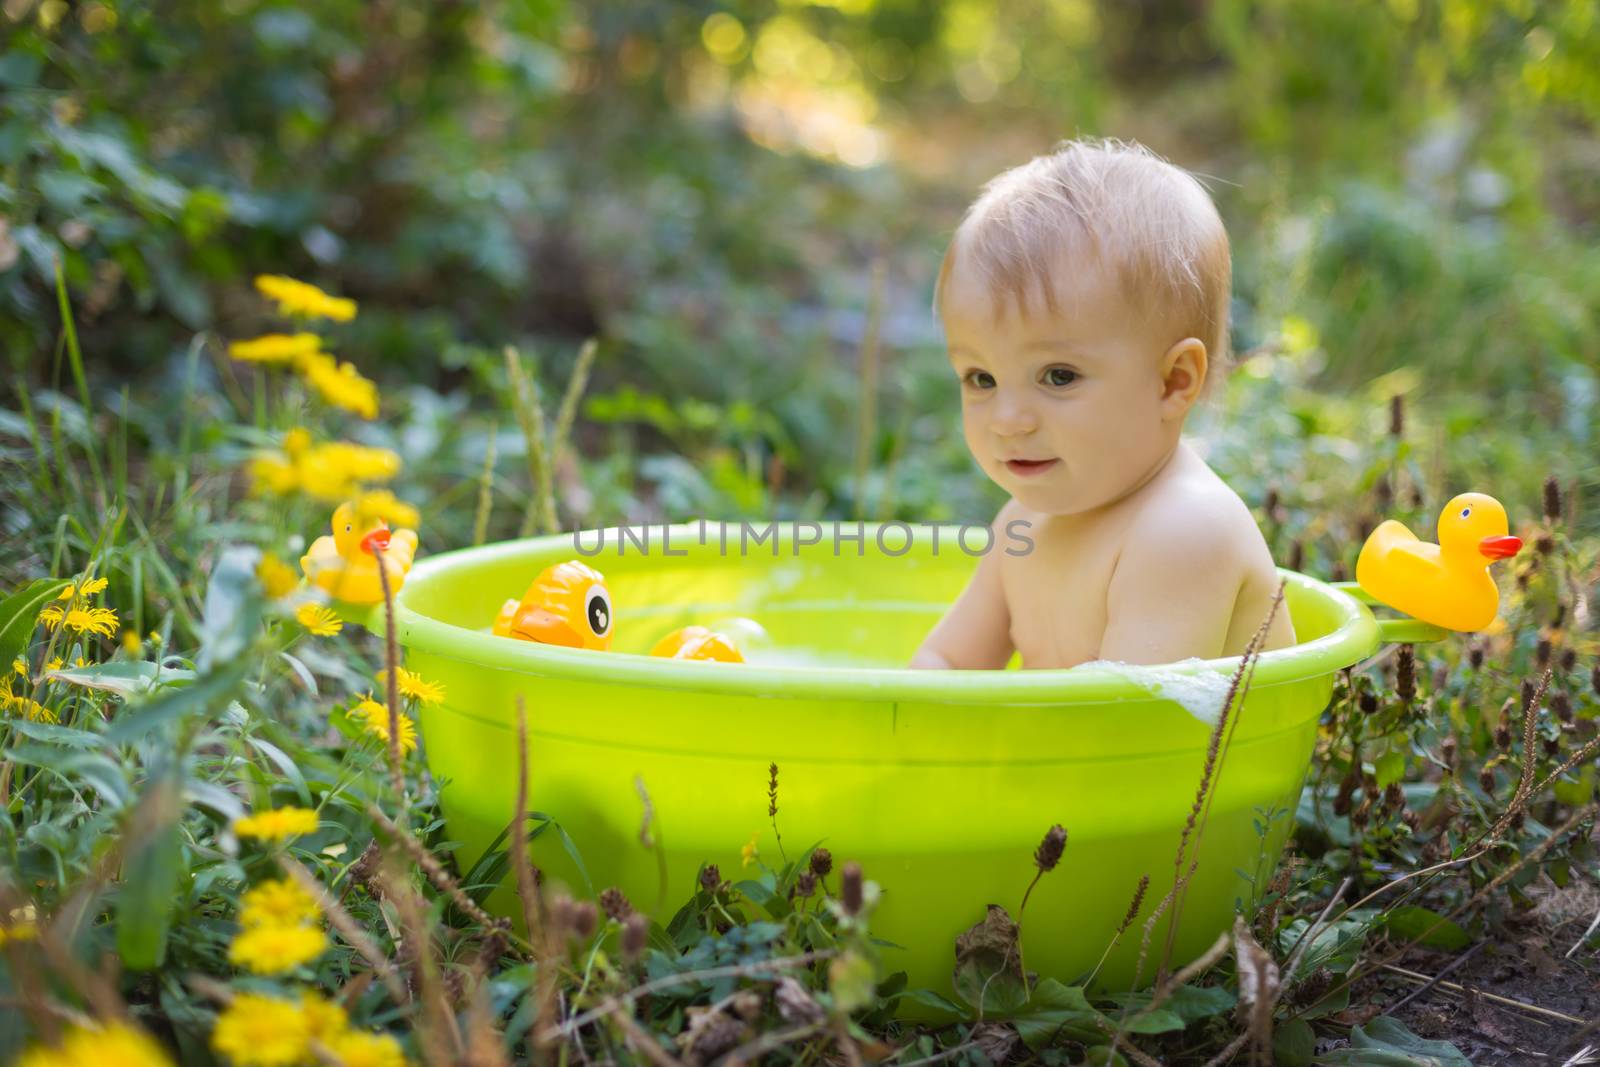 Cute toddler boy in basin taking a bath with bubbles and duck toys outdoor